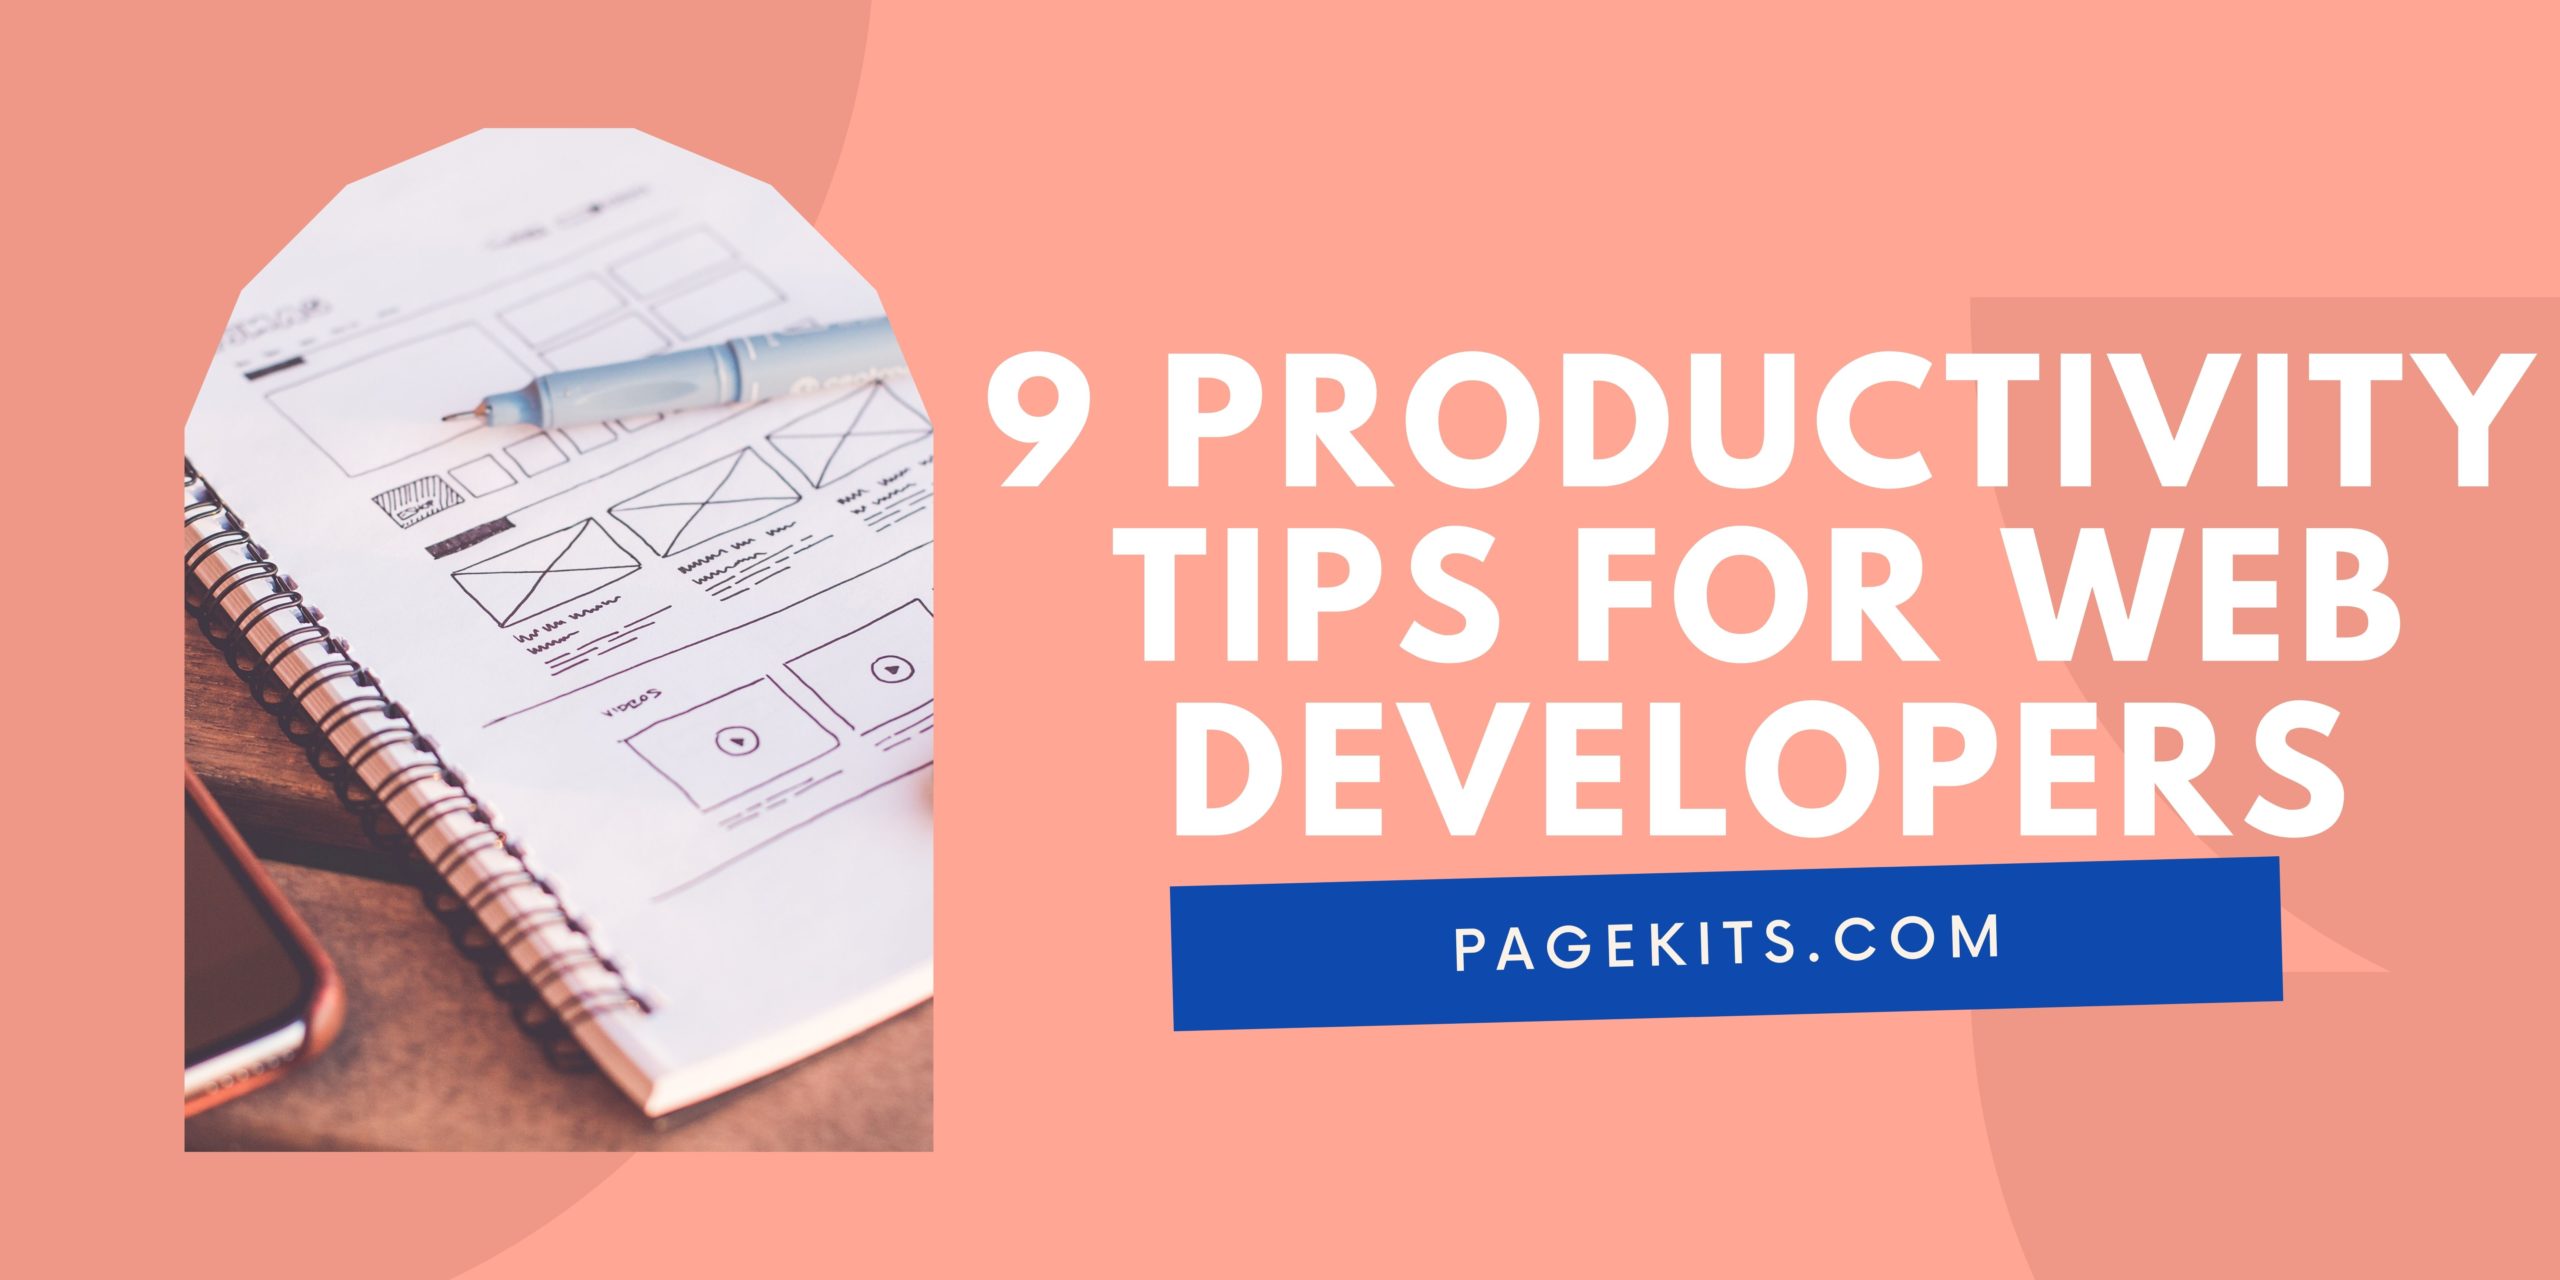 9 Productivity Tips for Web Developers